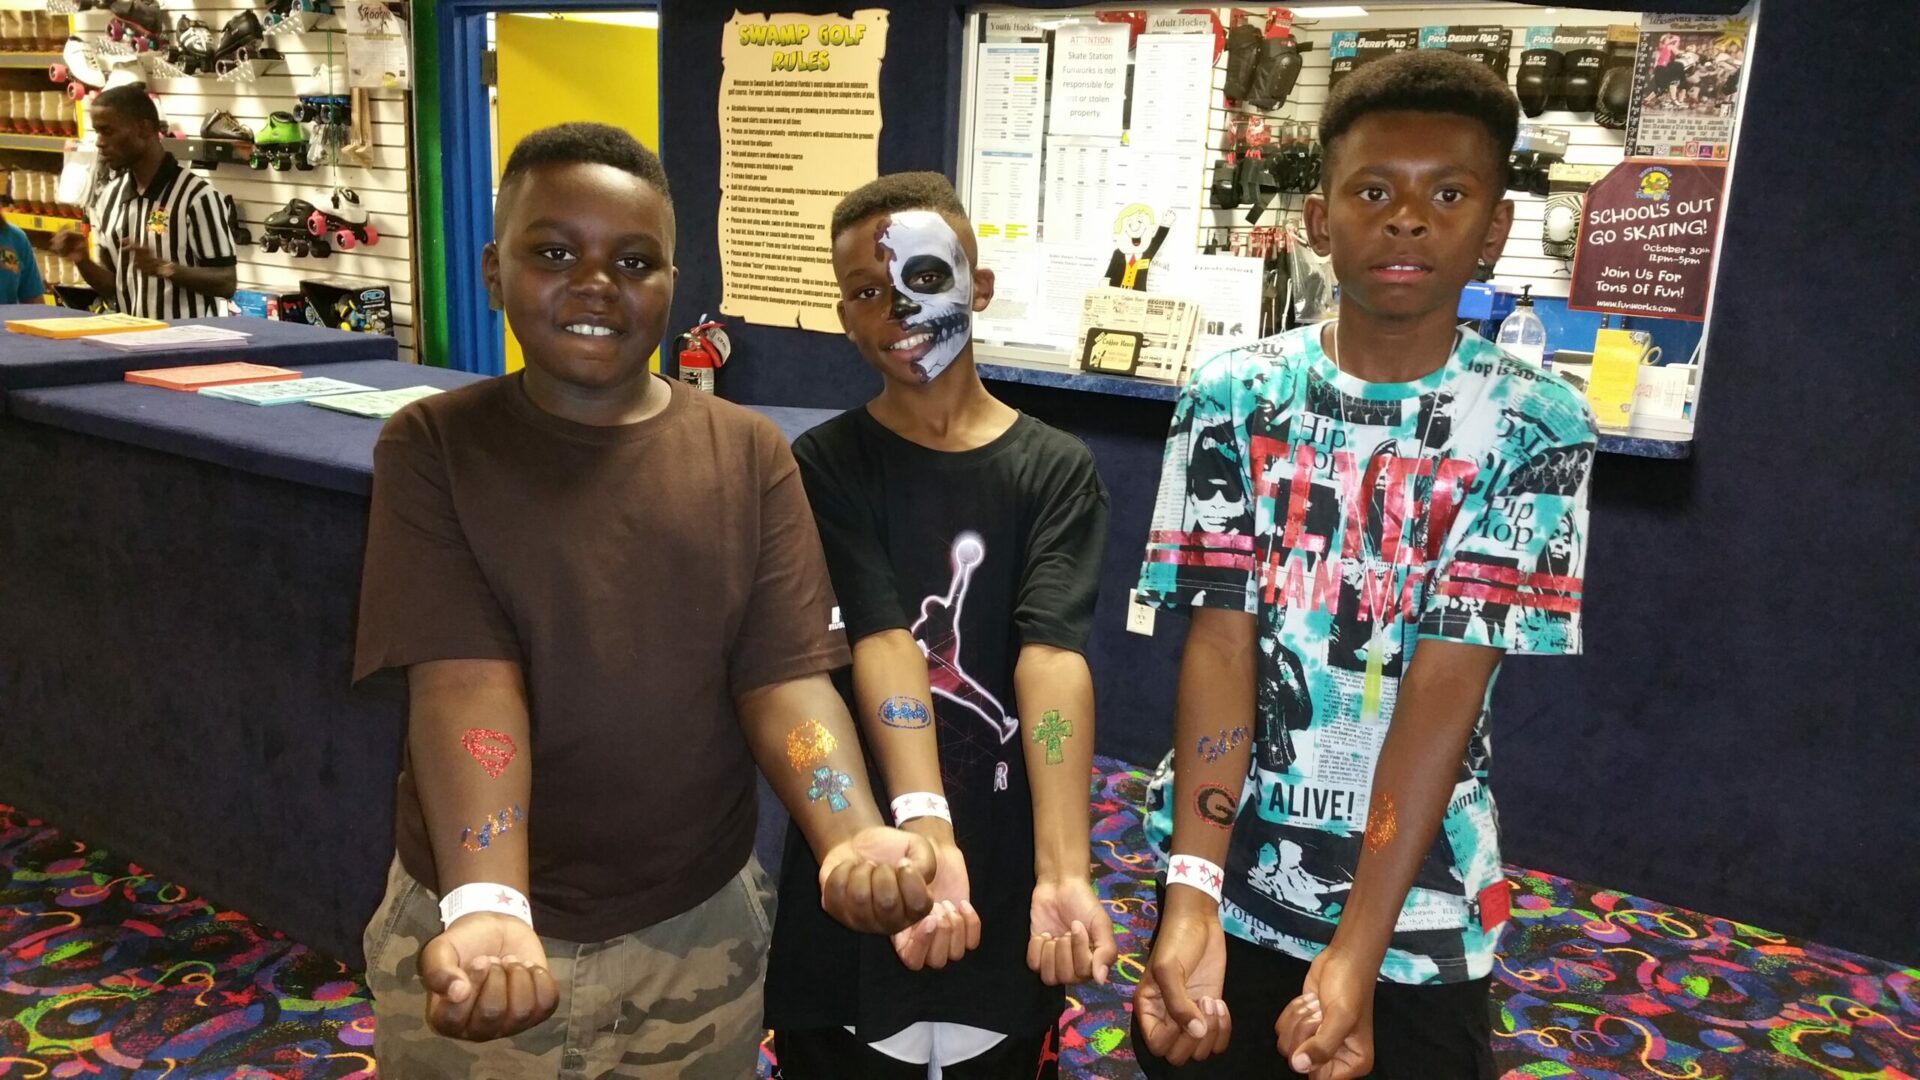 Young Boys With Face Paint and Temporary Tattoos